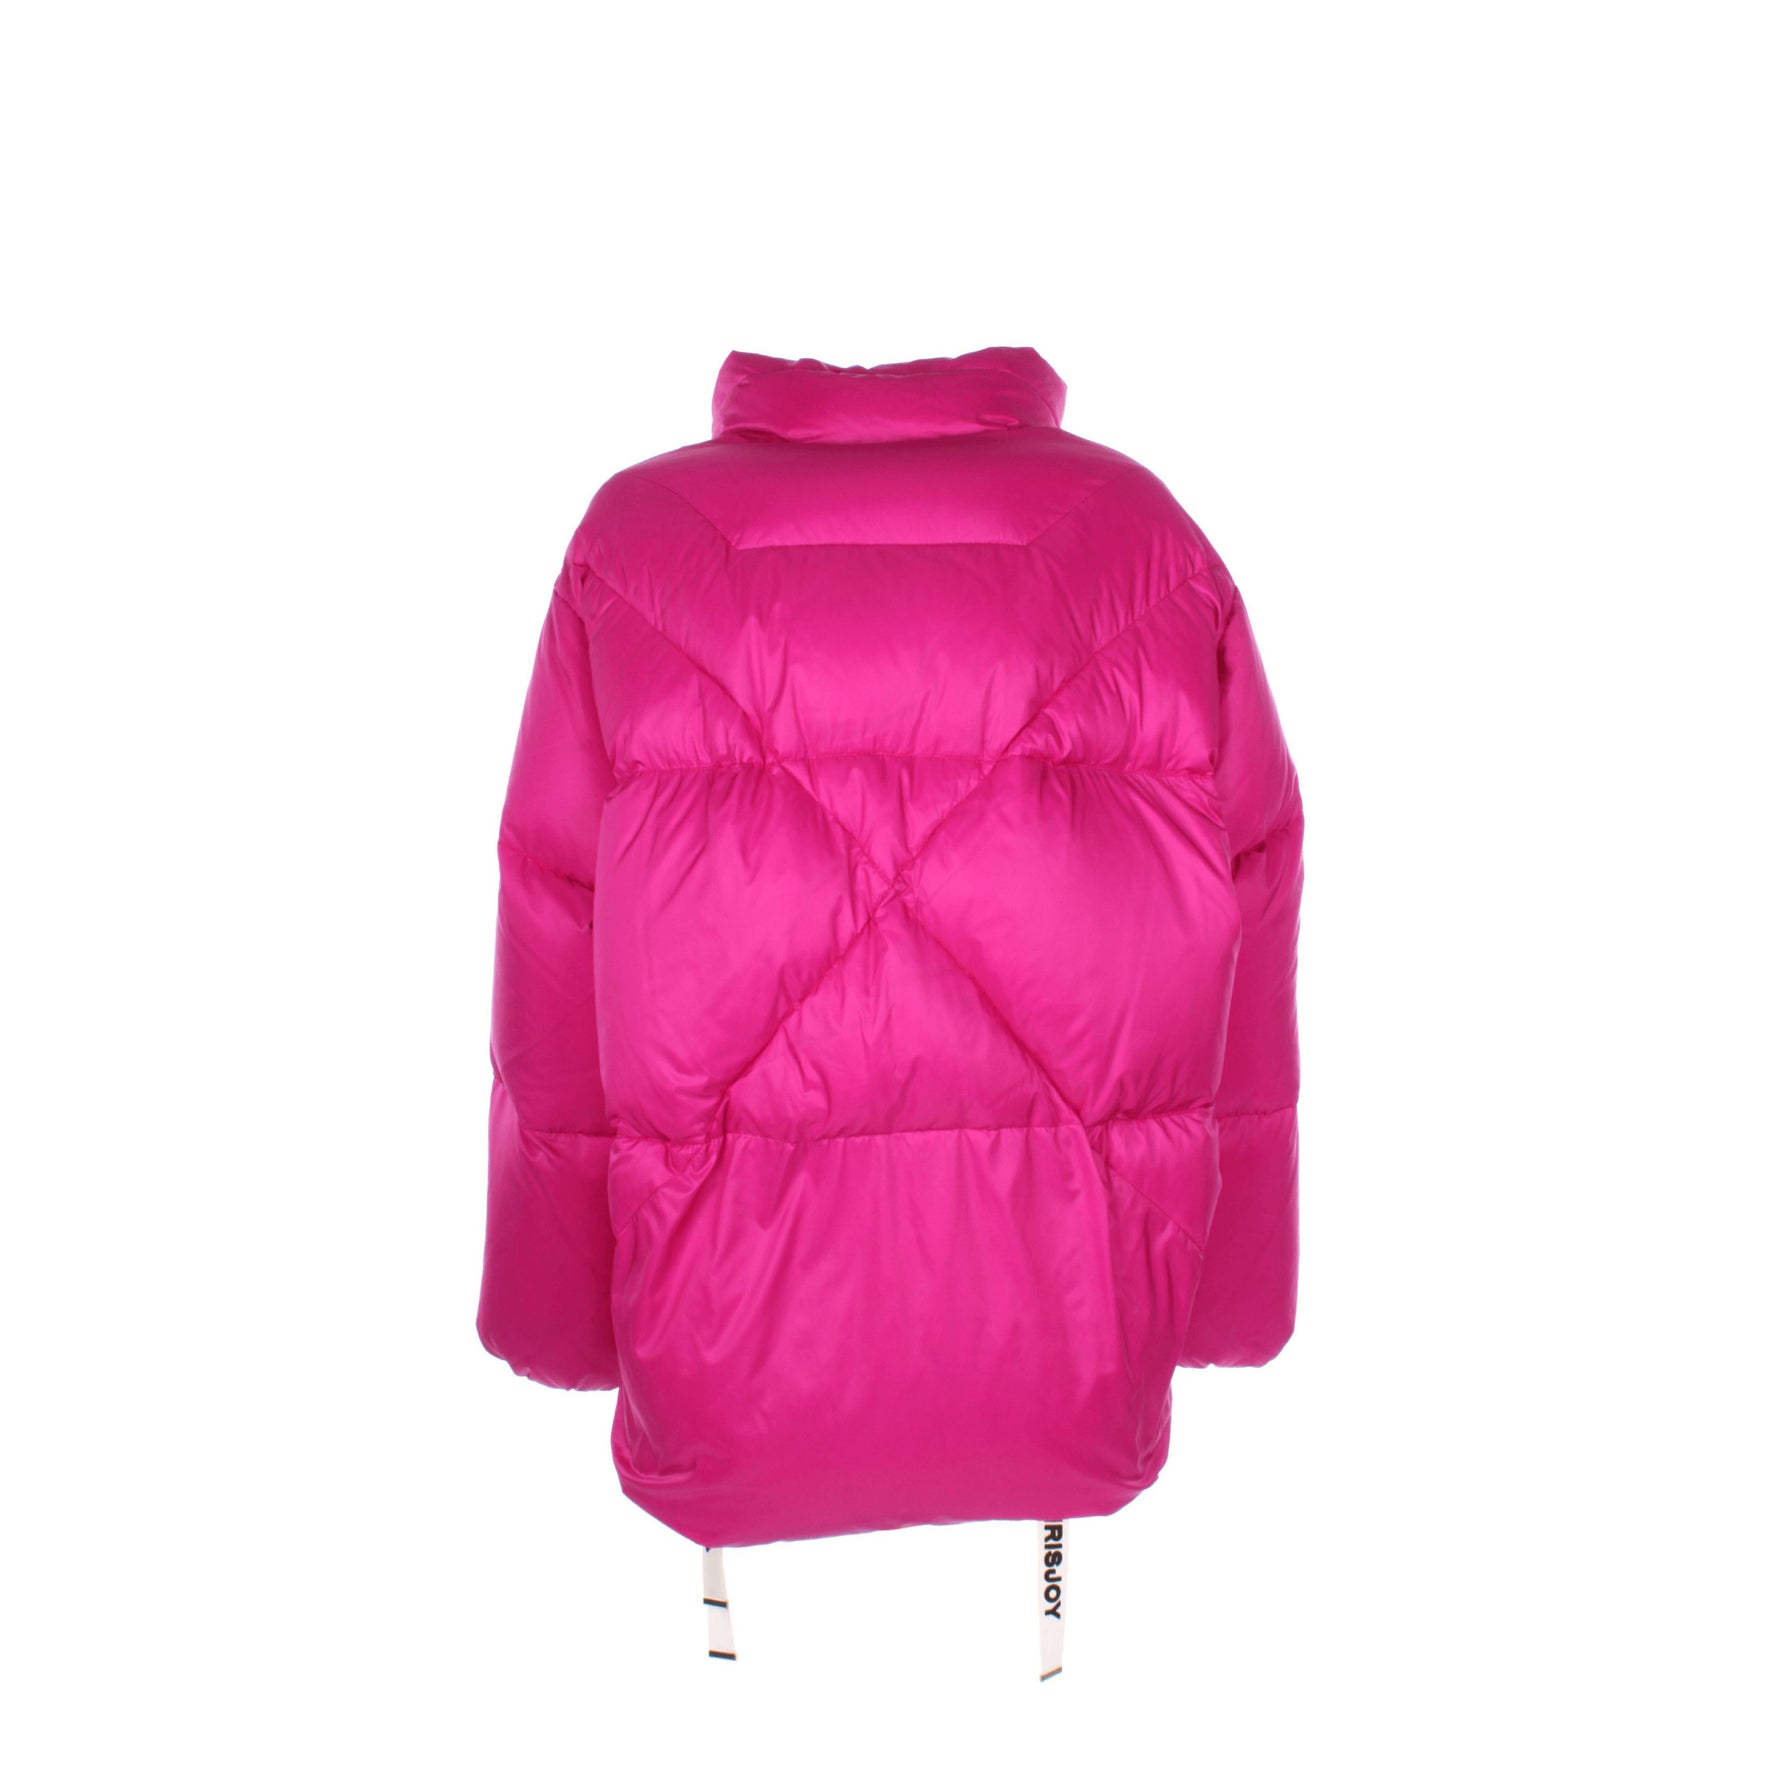 Khrisjoy Idee Regalo puff oversize bomber Donna Poliestere Fuxia